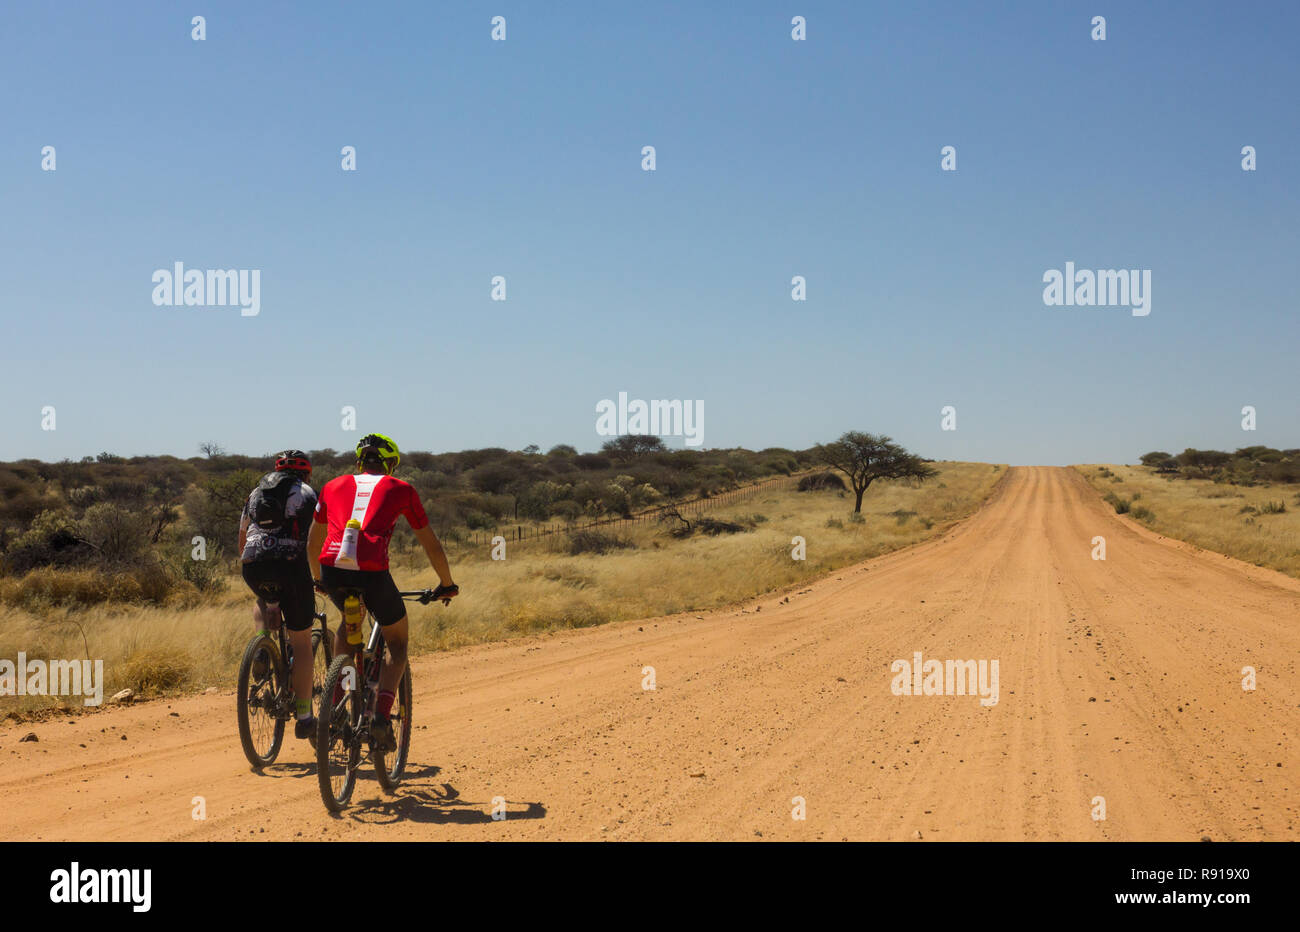 cyclists on MTB or ATB off road bike on dirt road in African landscape in Namibia Stock Photo